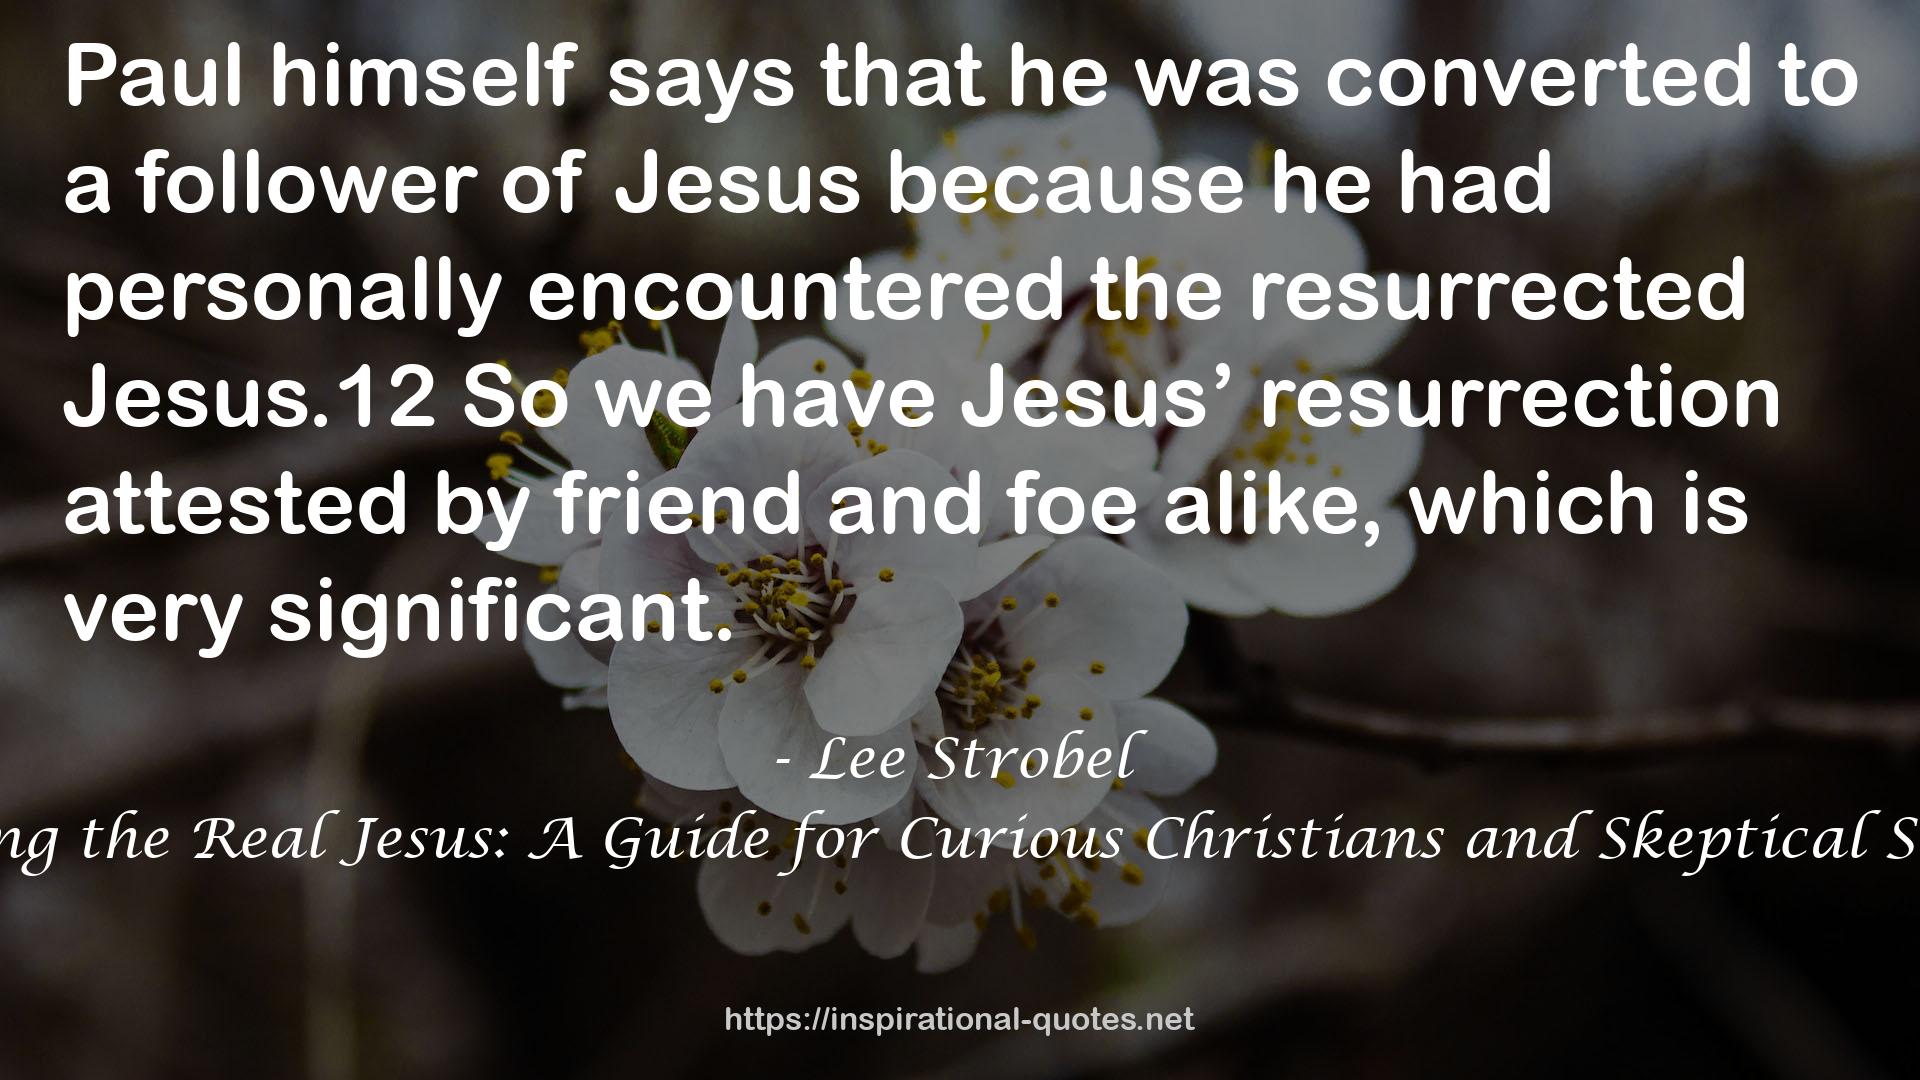 Finding the Real Jesus: A Guide for Curious Christians and Skeptical Seekers QUOTES